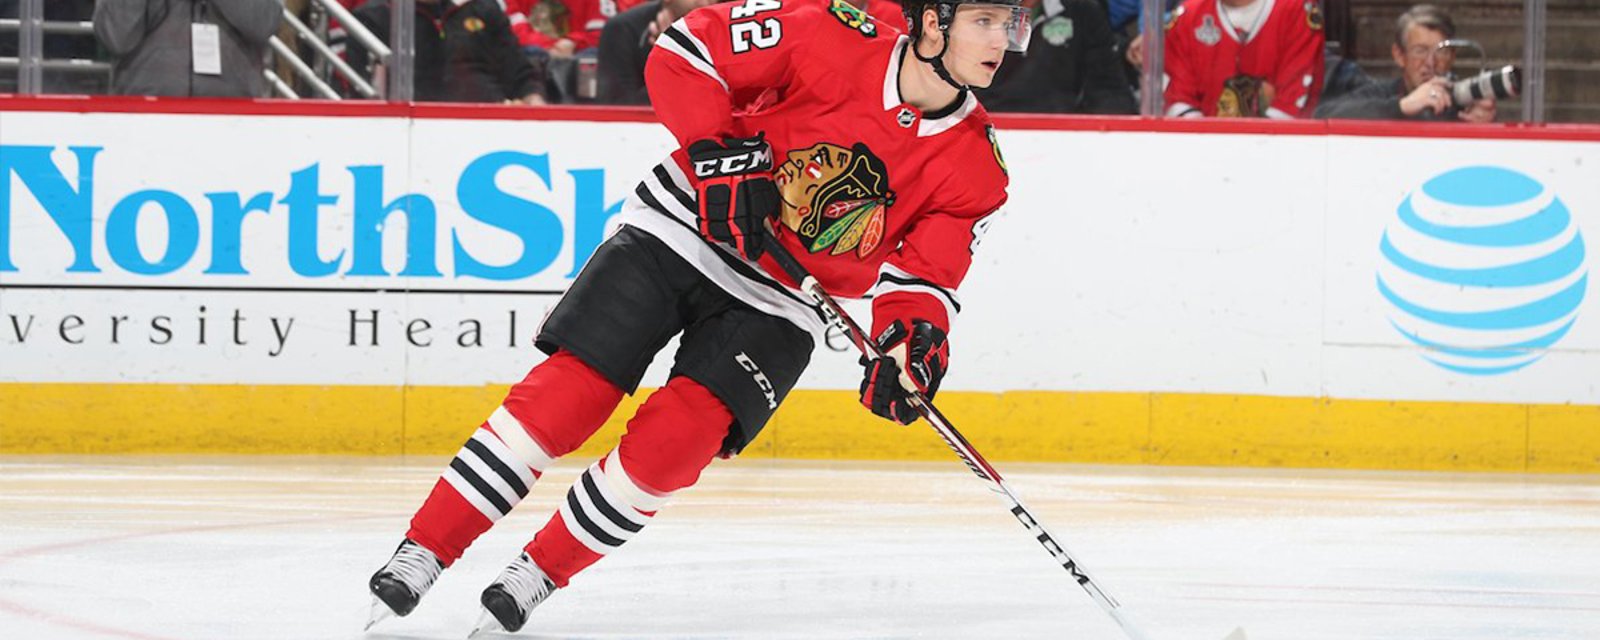 Breaking: Injuries force Blackhawks to make AHL call up